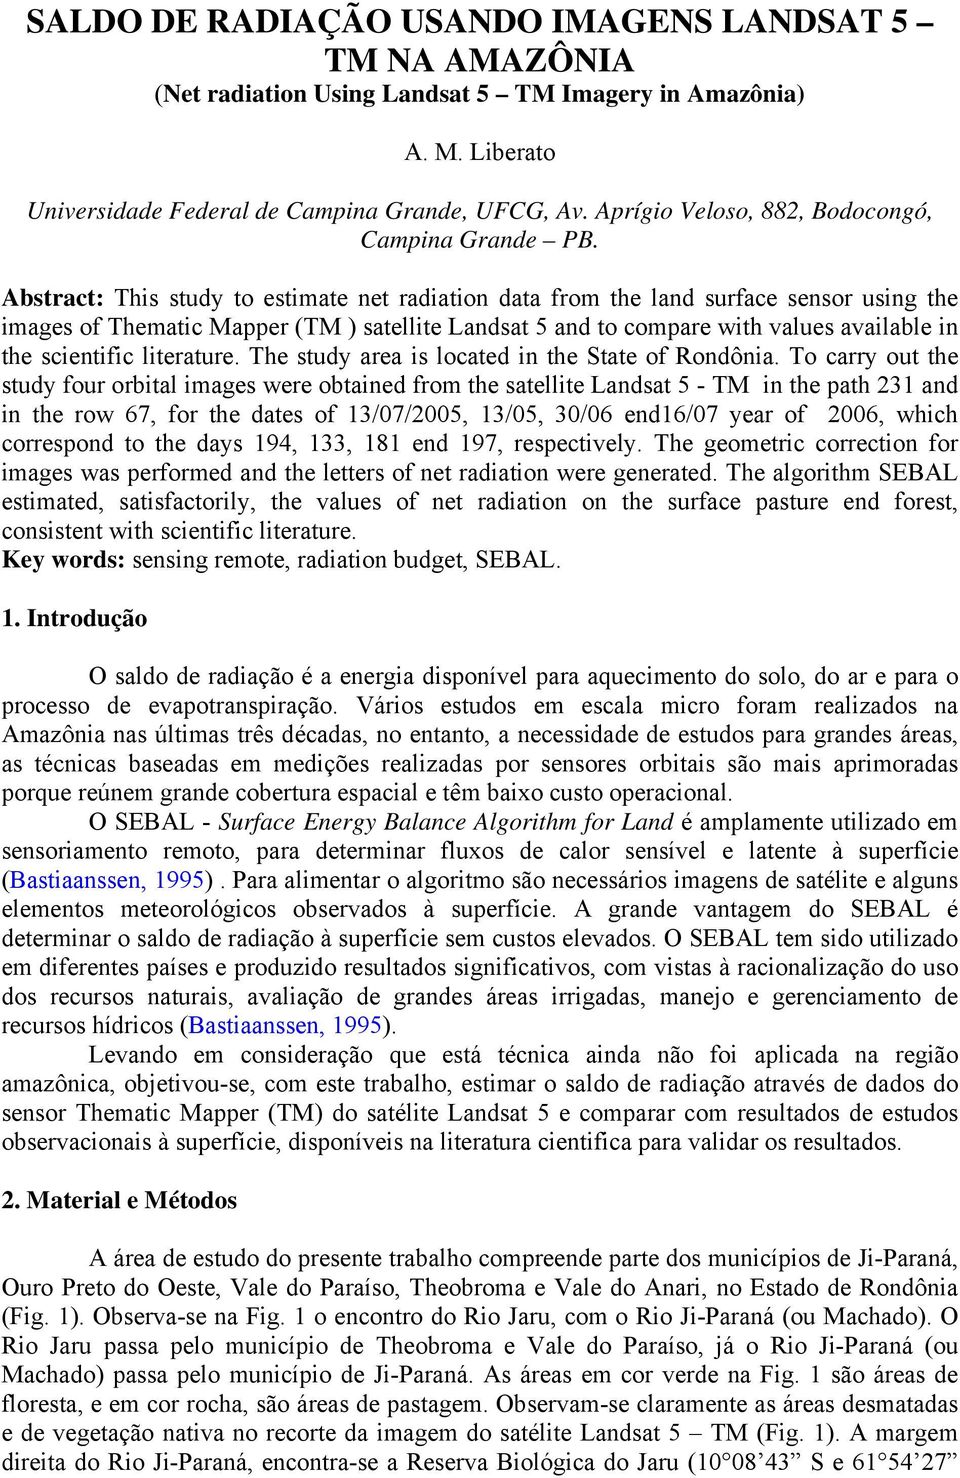 Abstract: This study to estimate net radiation data from the land surface sensor using the images of Thematic Mapper (TM ) satellite Landsat 5 and to compare with values available in the scientific